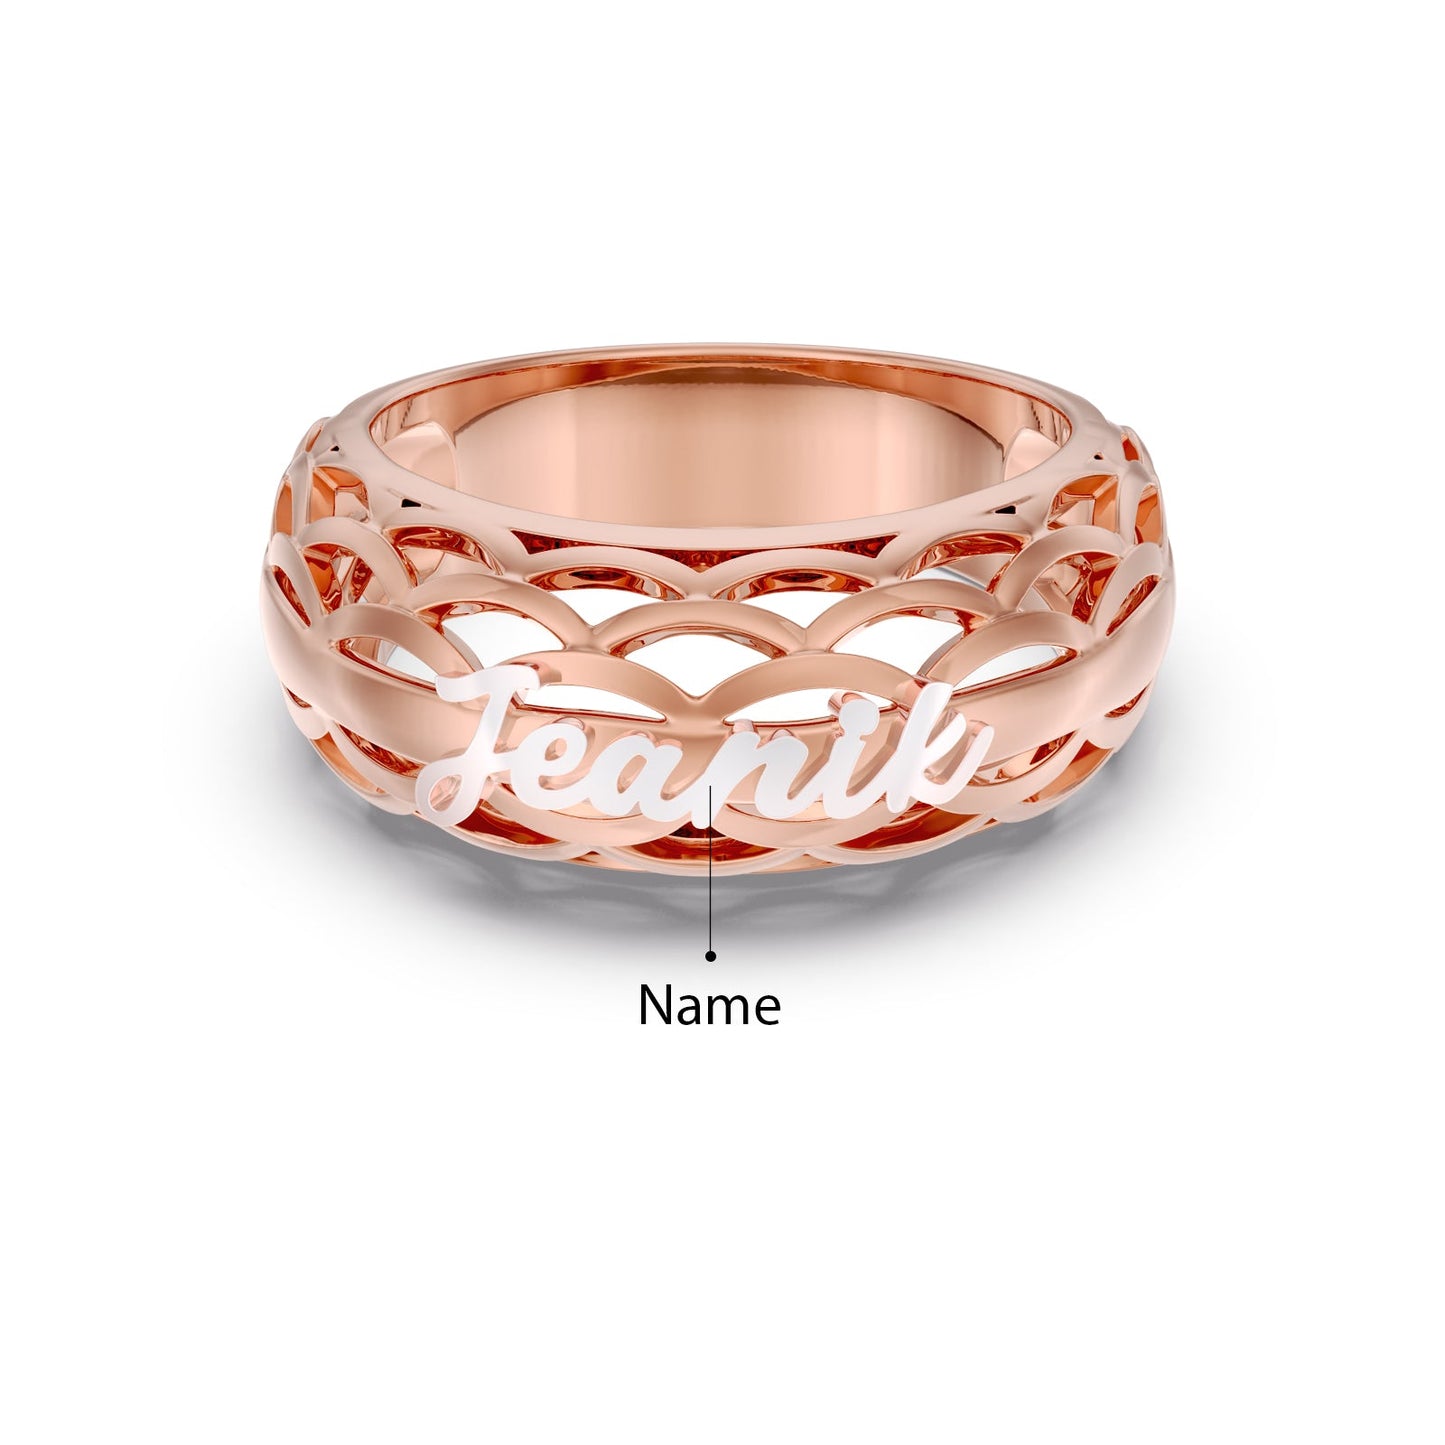 ThinkEngraved Father's Ring 4 / 14k rose gold and sterling silver Personalized Father's Dad Ring 1 Cut-Out Kids Name